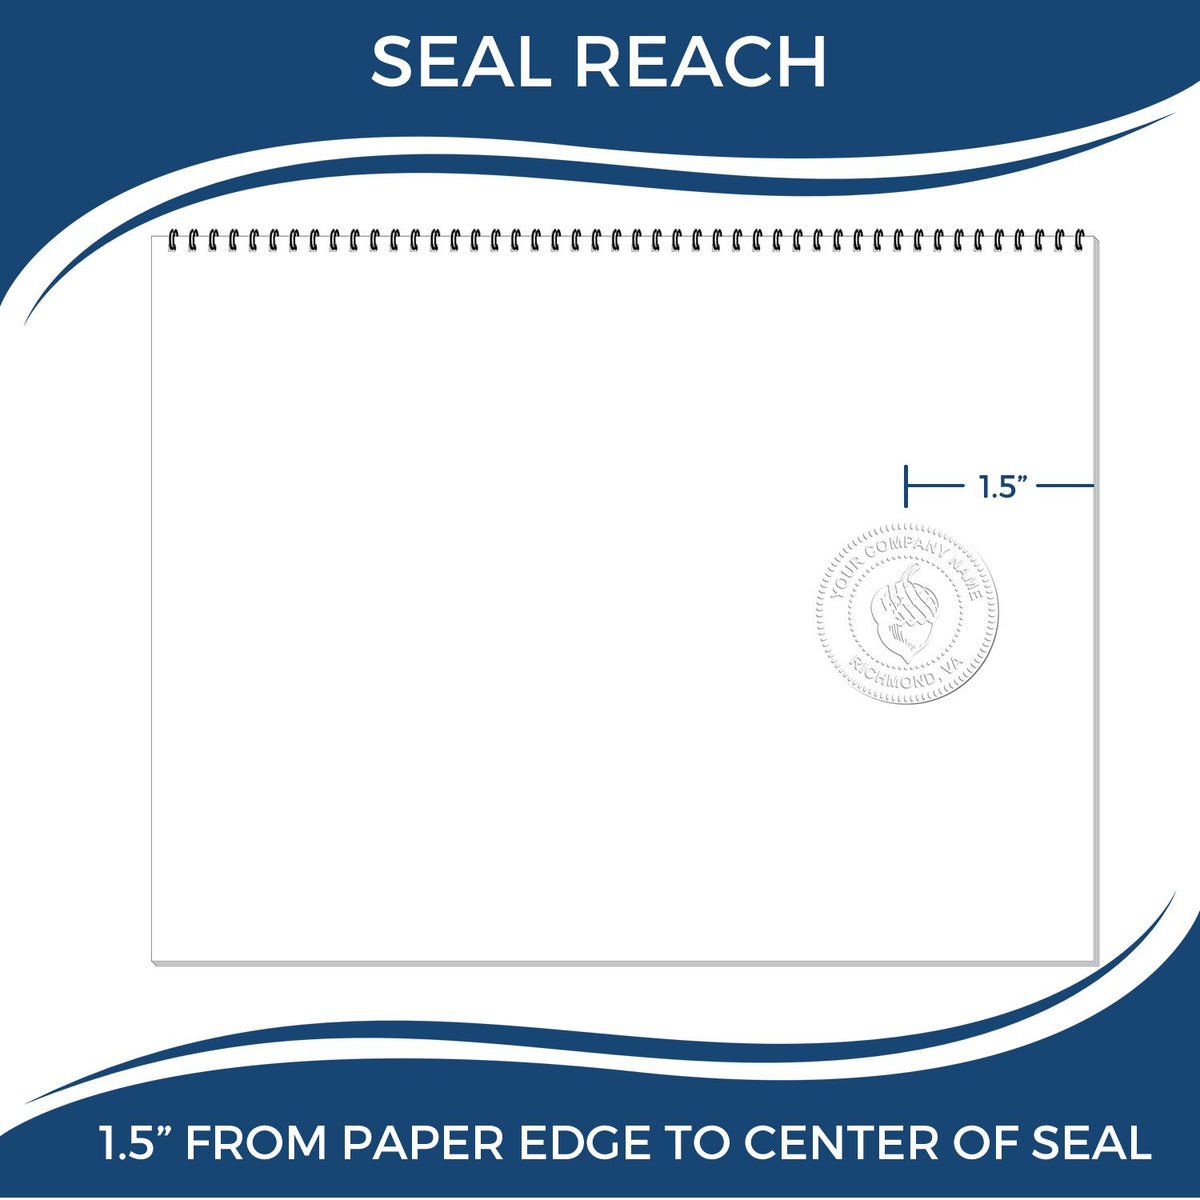 An infographic showing the seal reach which is represented by a ruler and a miniature seal image of the Handheld Colorado Professional Geologist Embosser